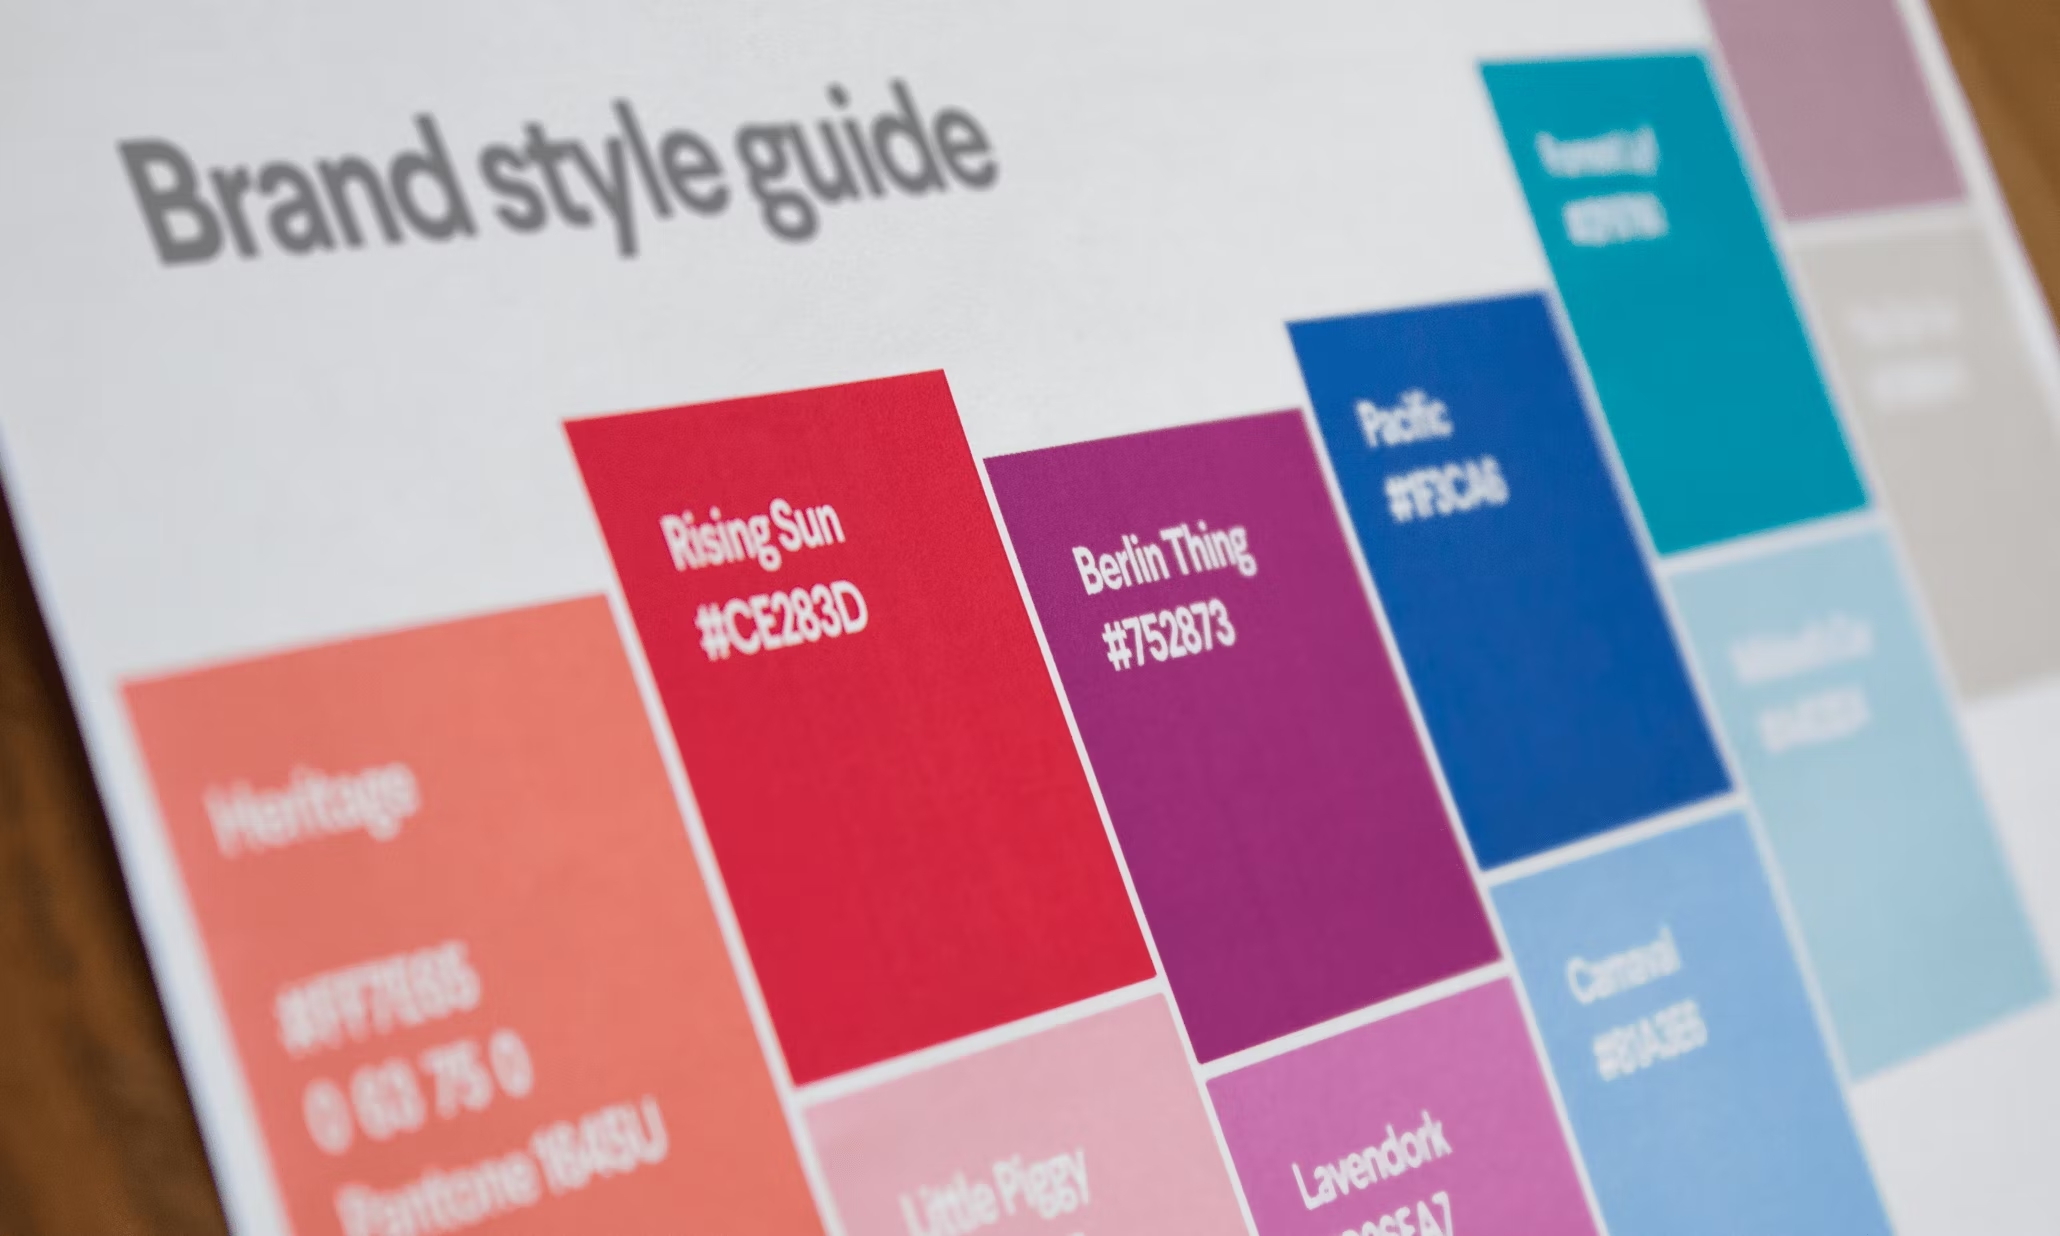 A Complete Guide To Brand Style Guidelines